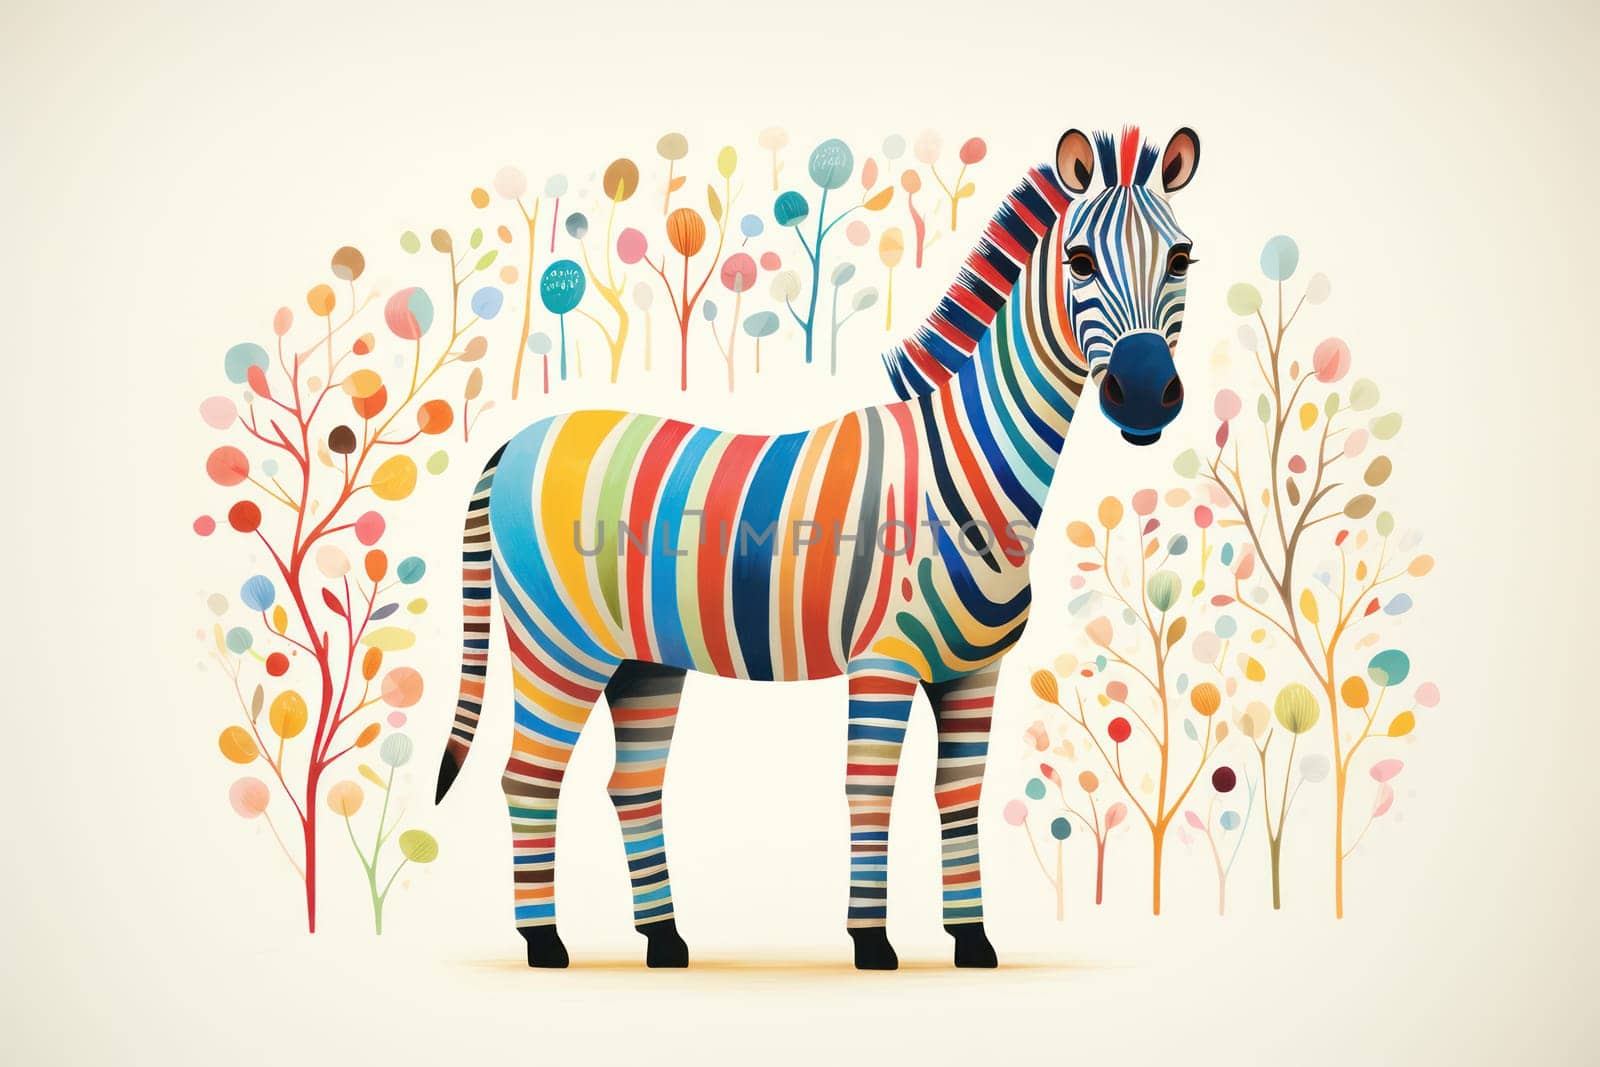 Striped Harmony: A Colorful Zebra Silhouette in African Savanna